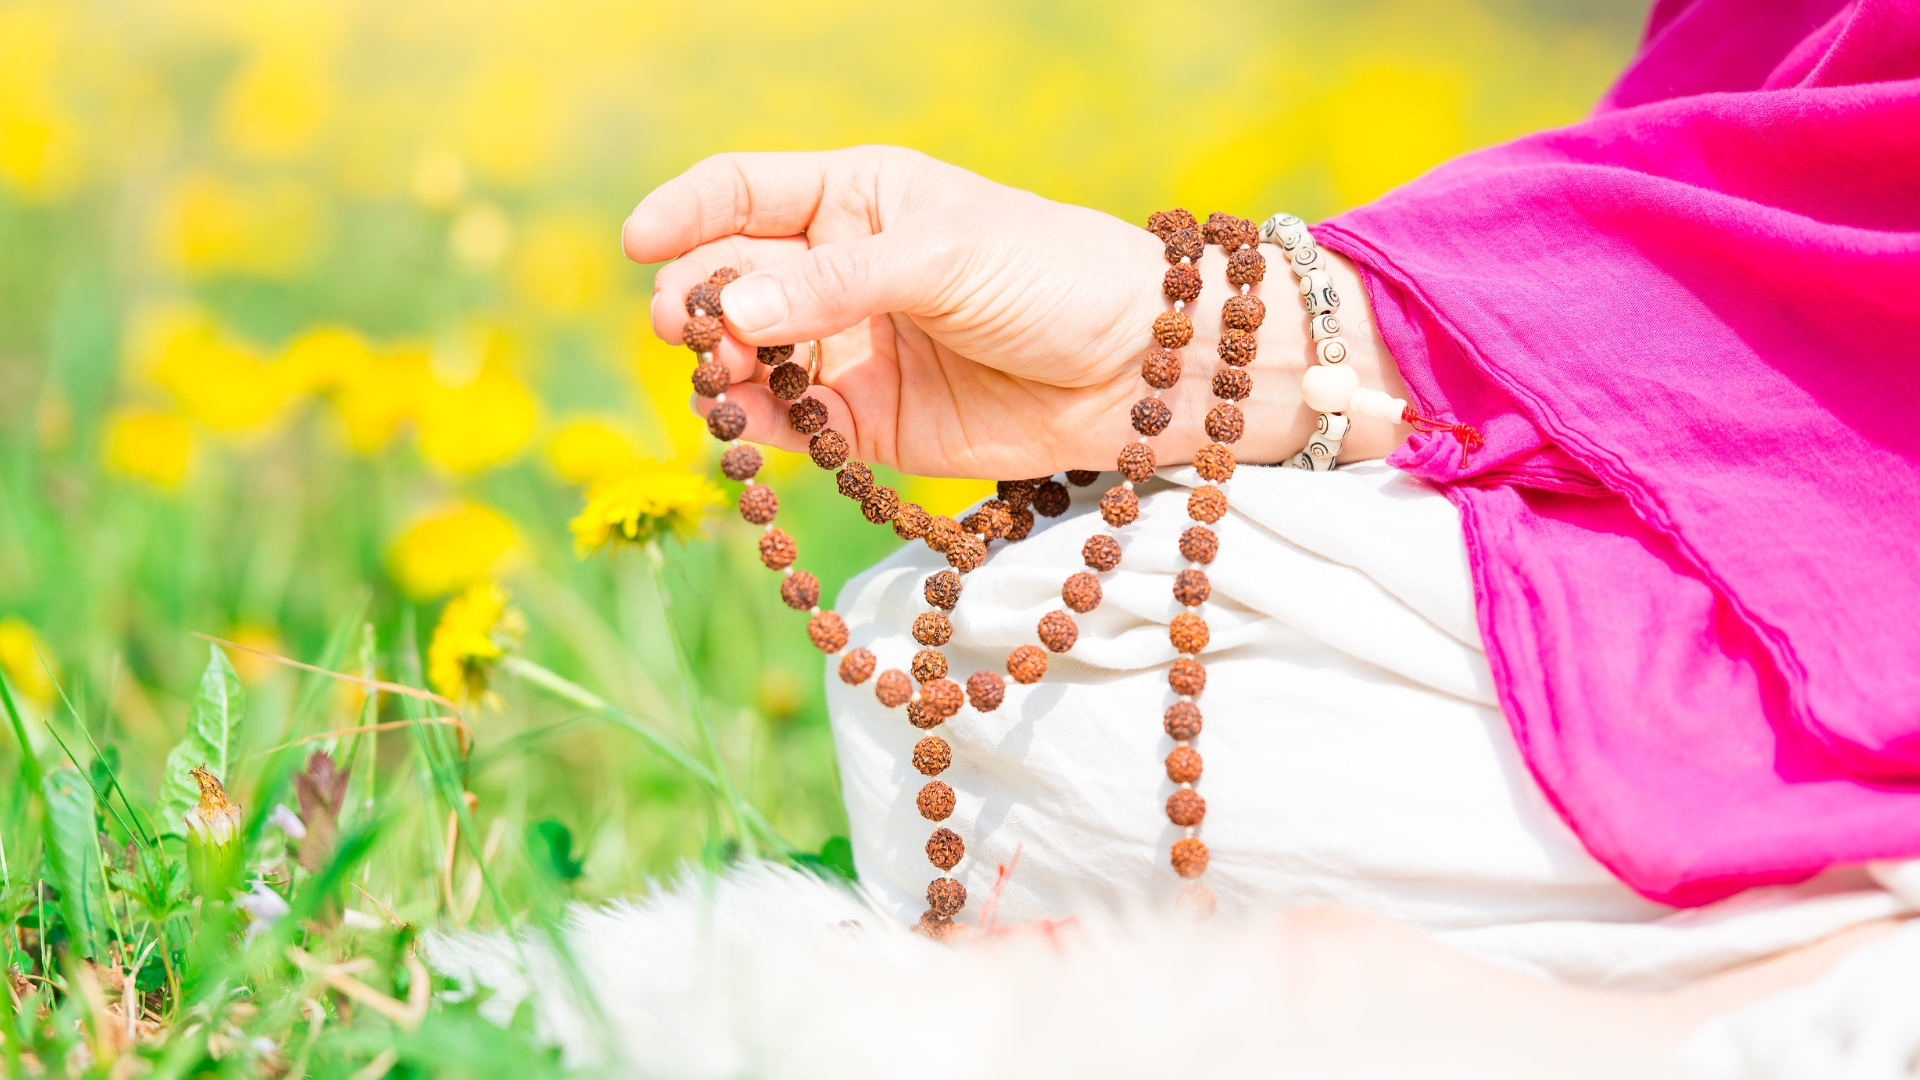 Woman sitting in a meditative position holding mala beads in her hand.